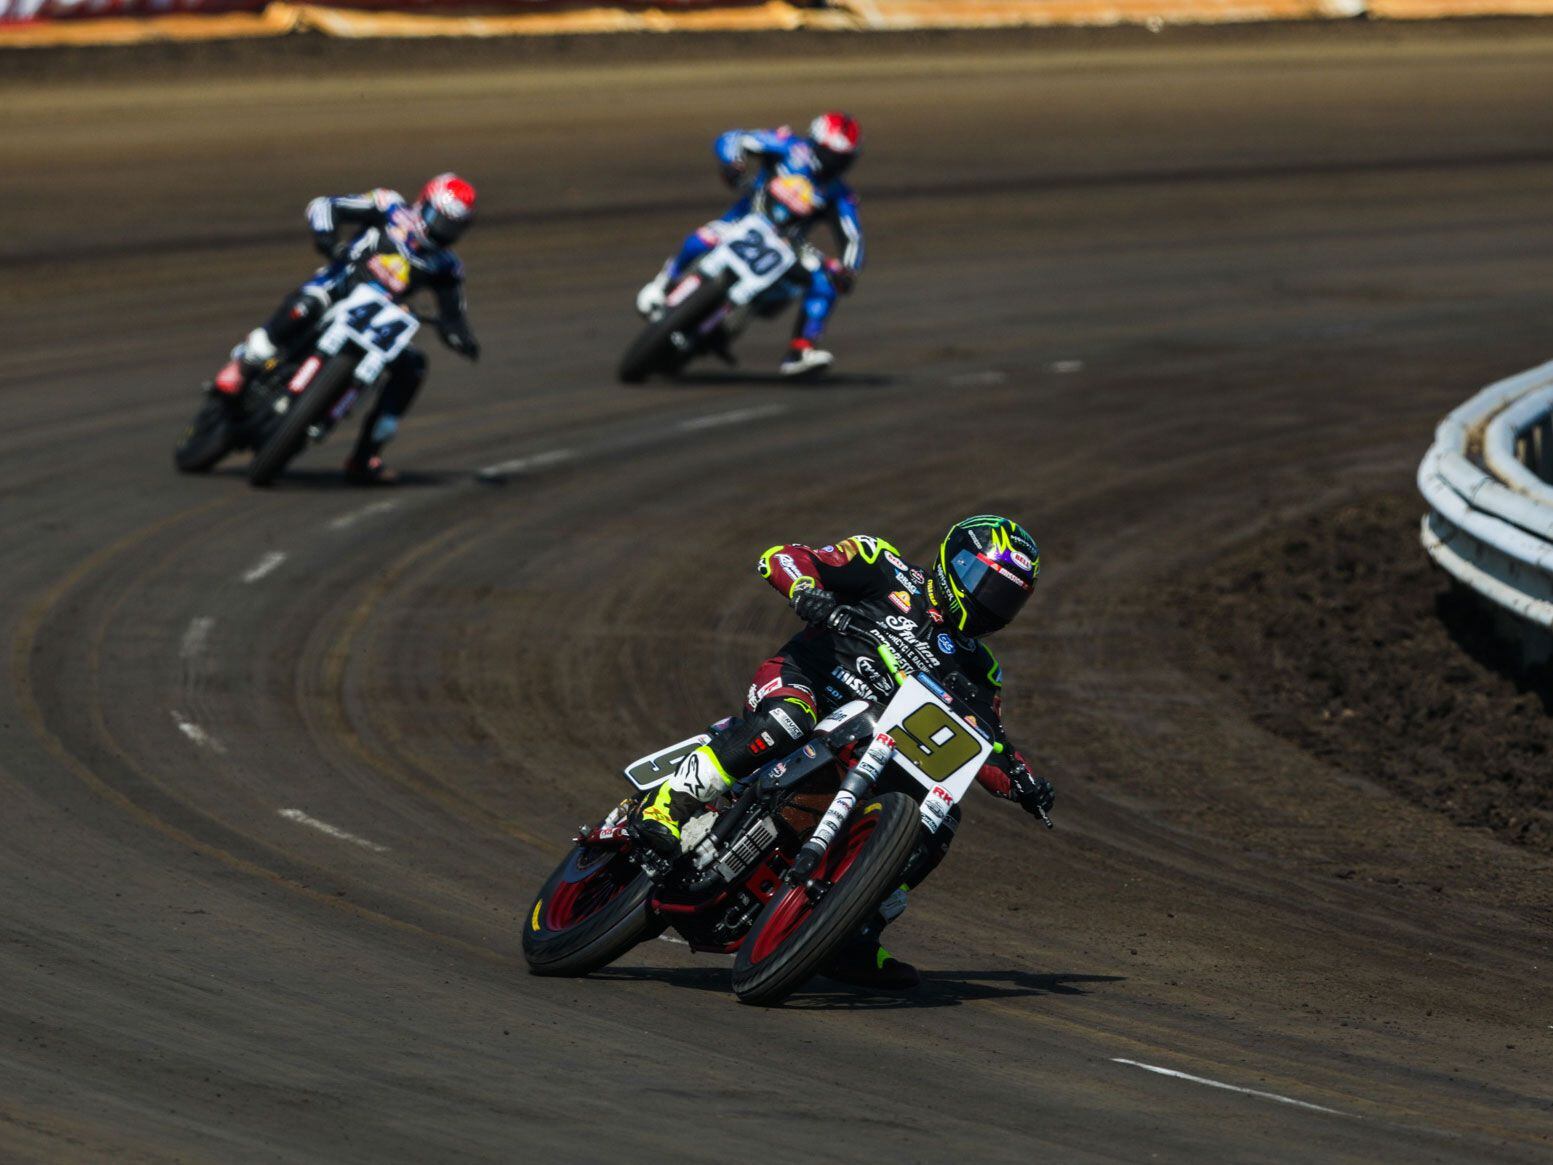 American Flat Track instituted new rules for non-production-based engines in the SuperTwins class. What does this mean for the race-only Indian FTR750?